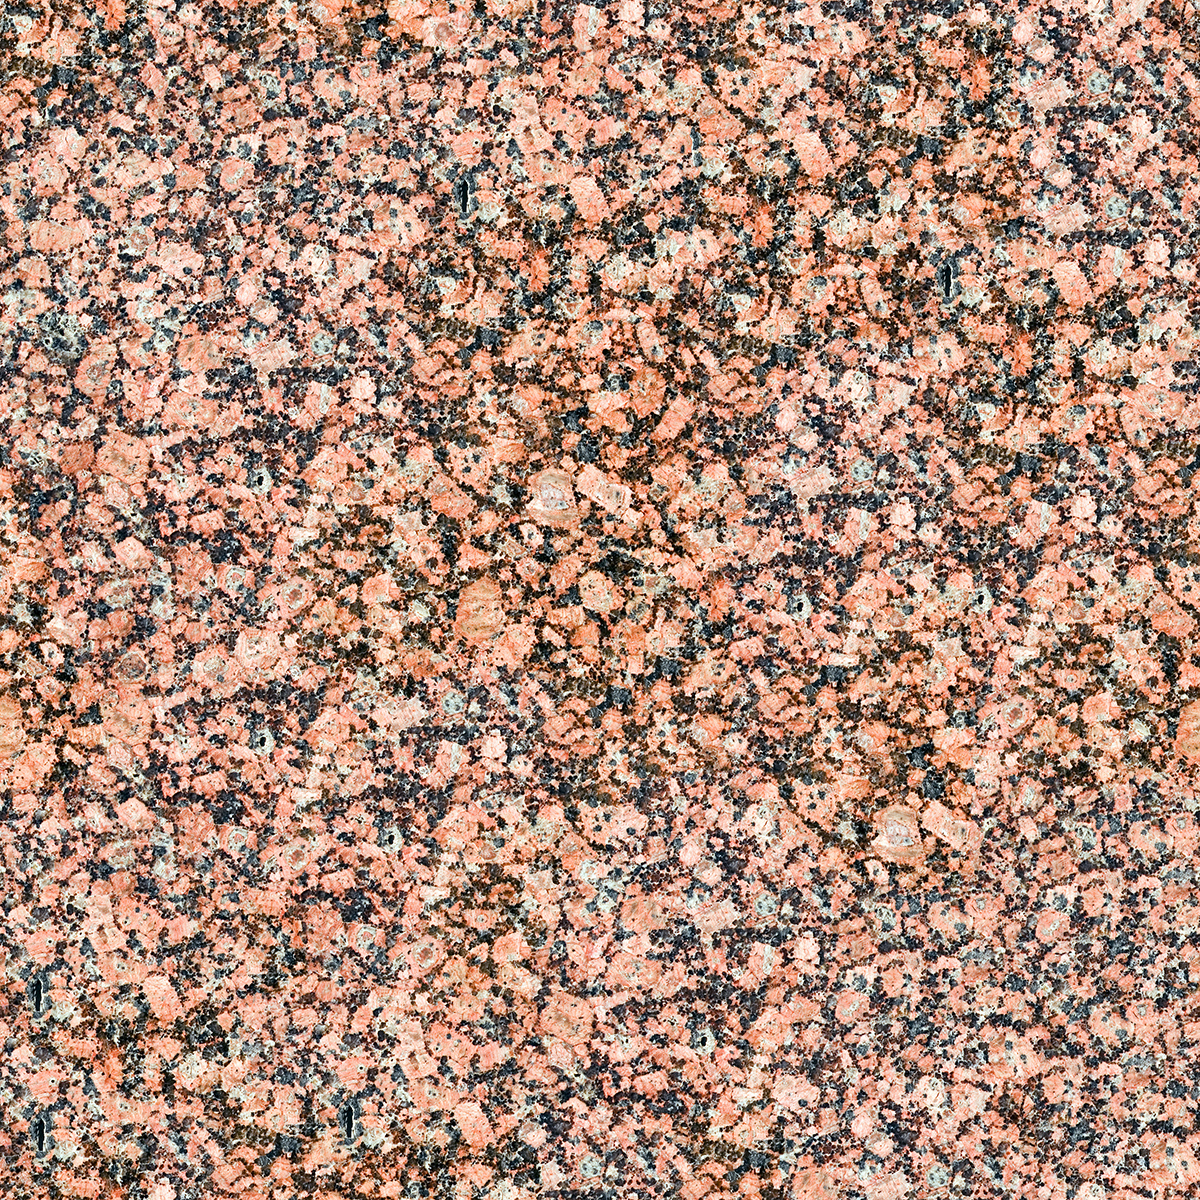 A close up of a stone